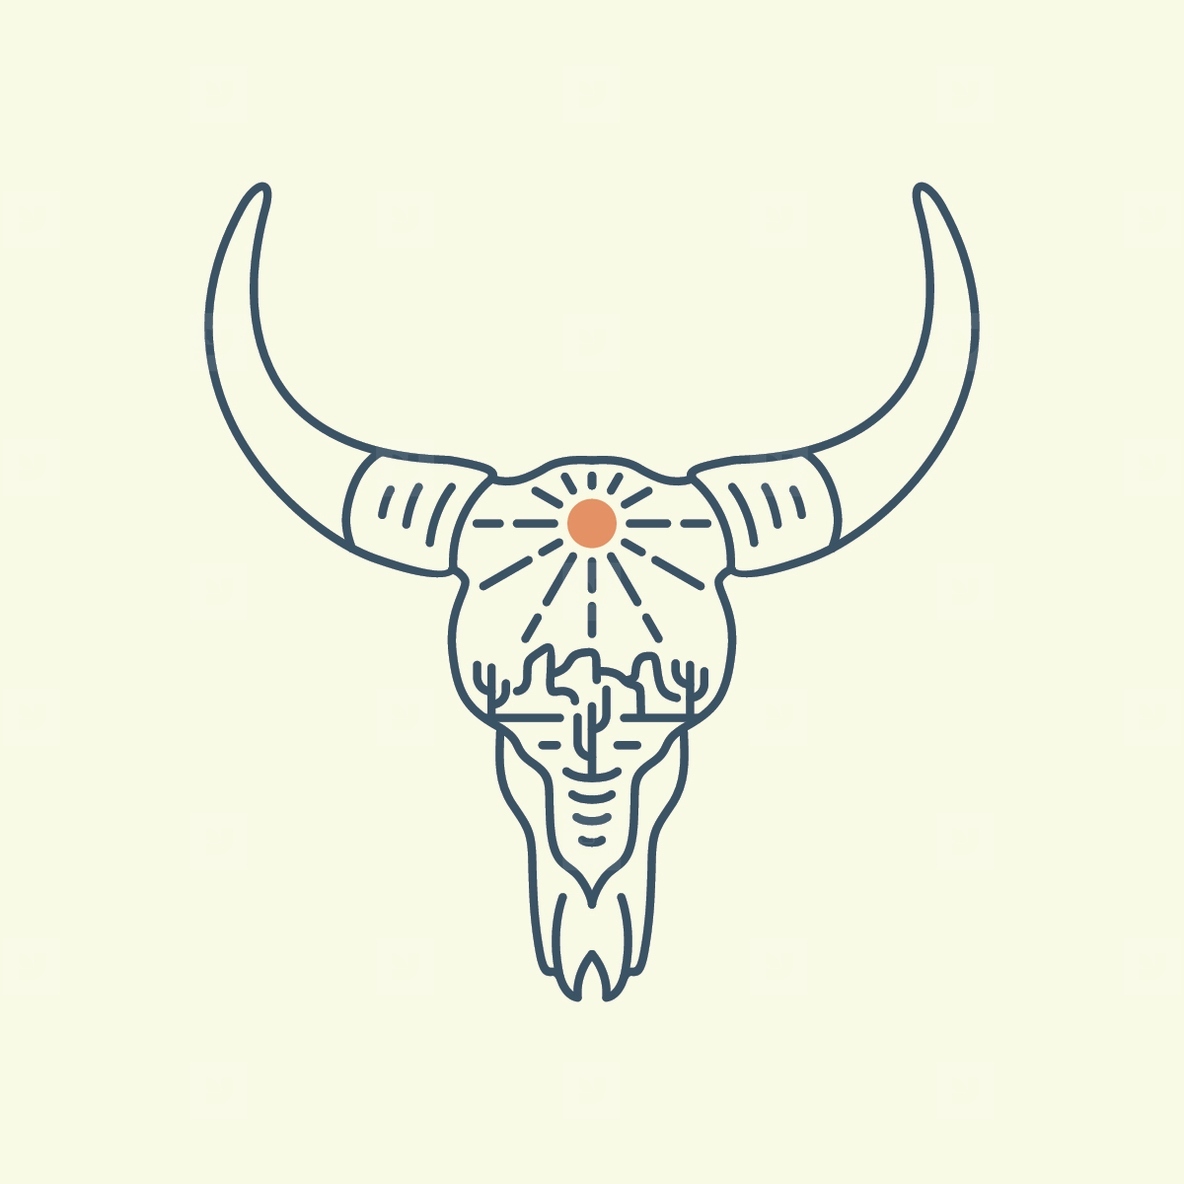 Bull Skull Drawing - How To Draw A Bull Skull Step By Step